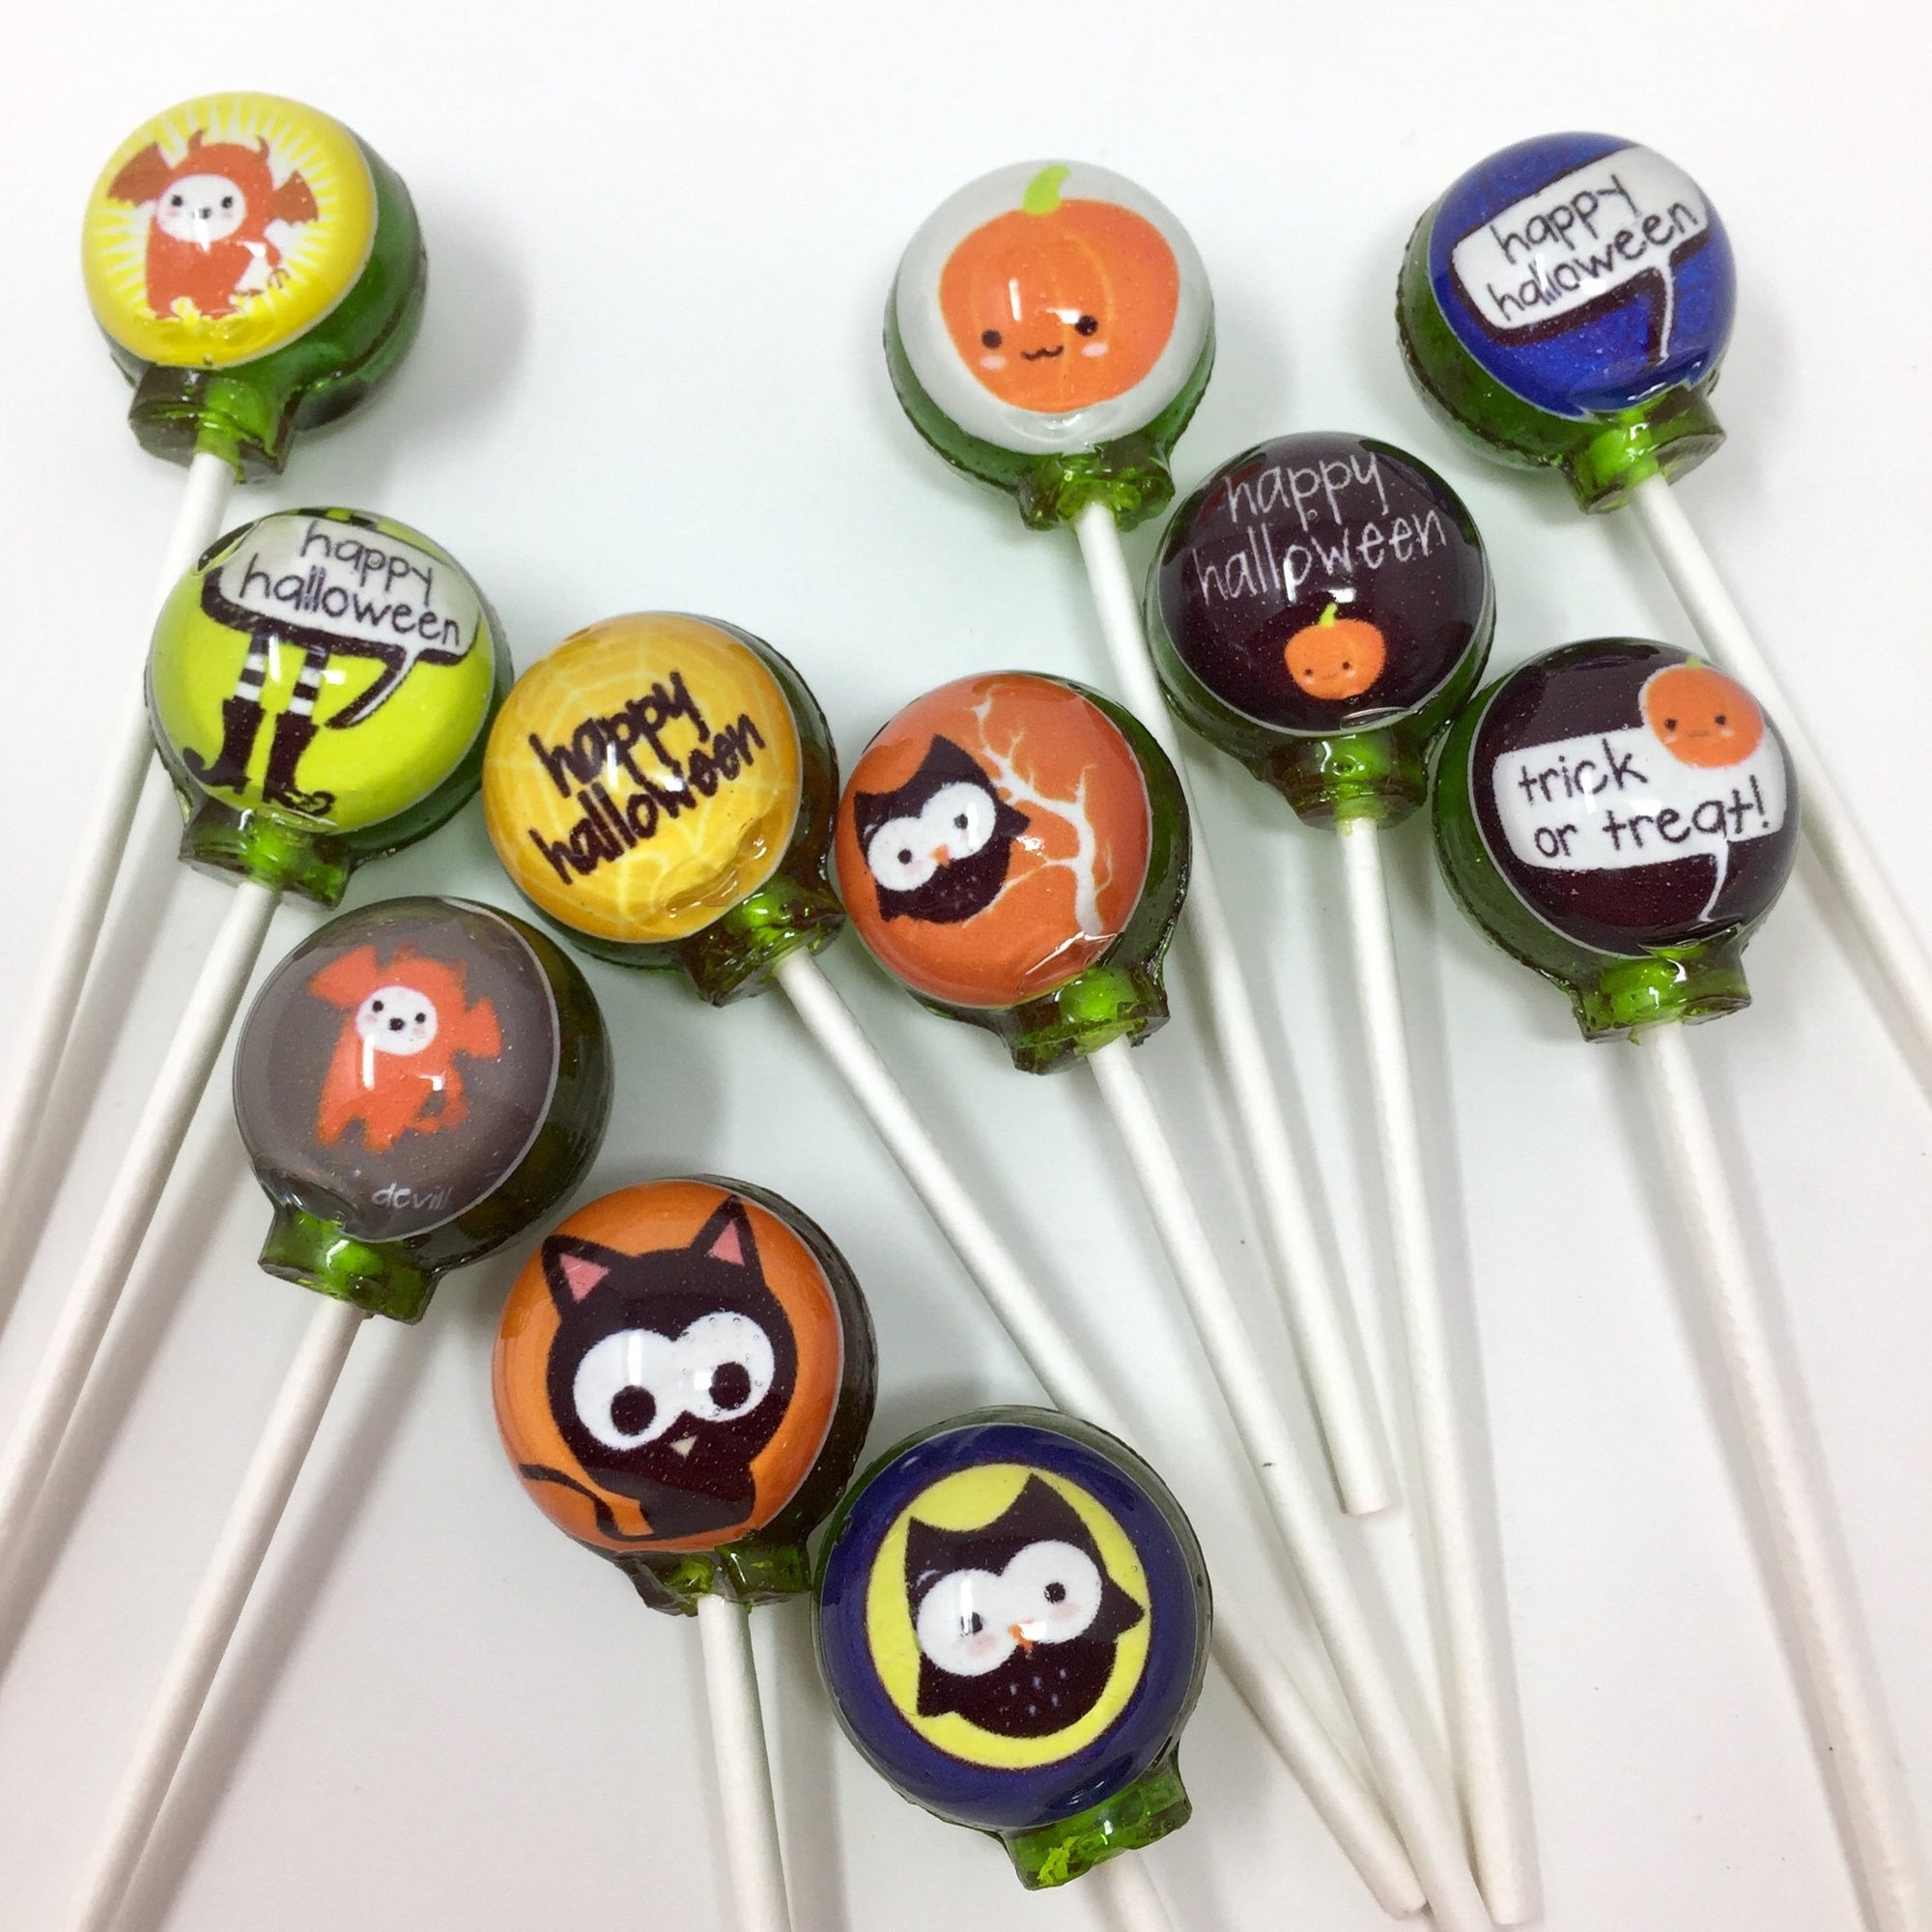 Cute Halloween Critter Boop Lollipops 6-piece set by I Want Candy!